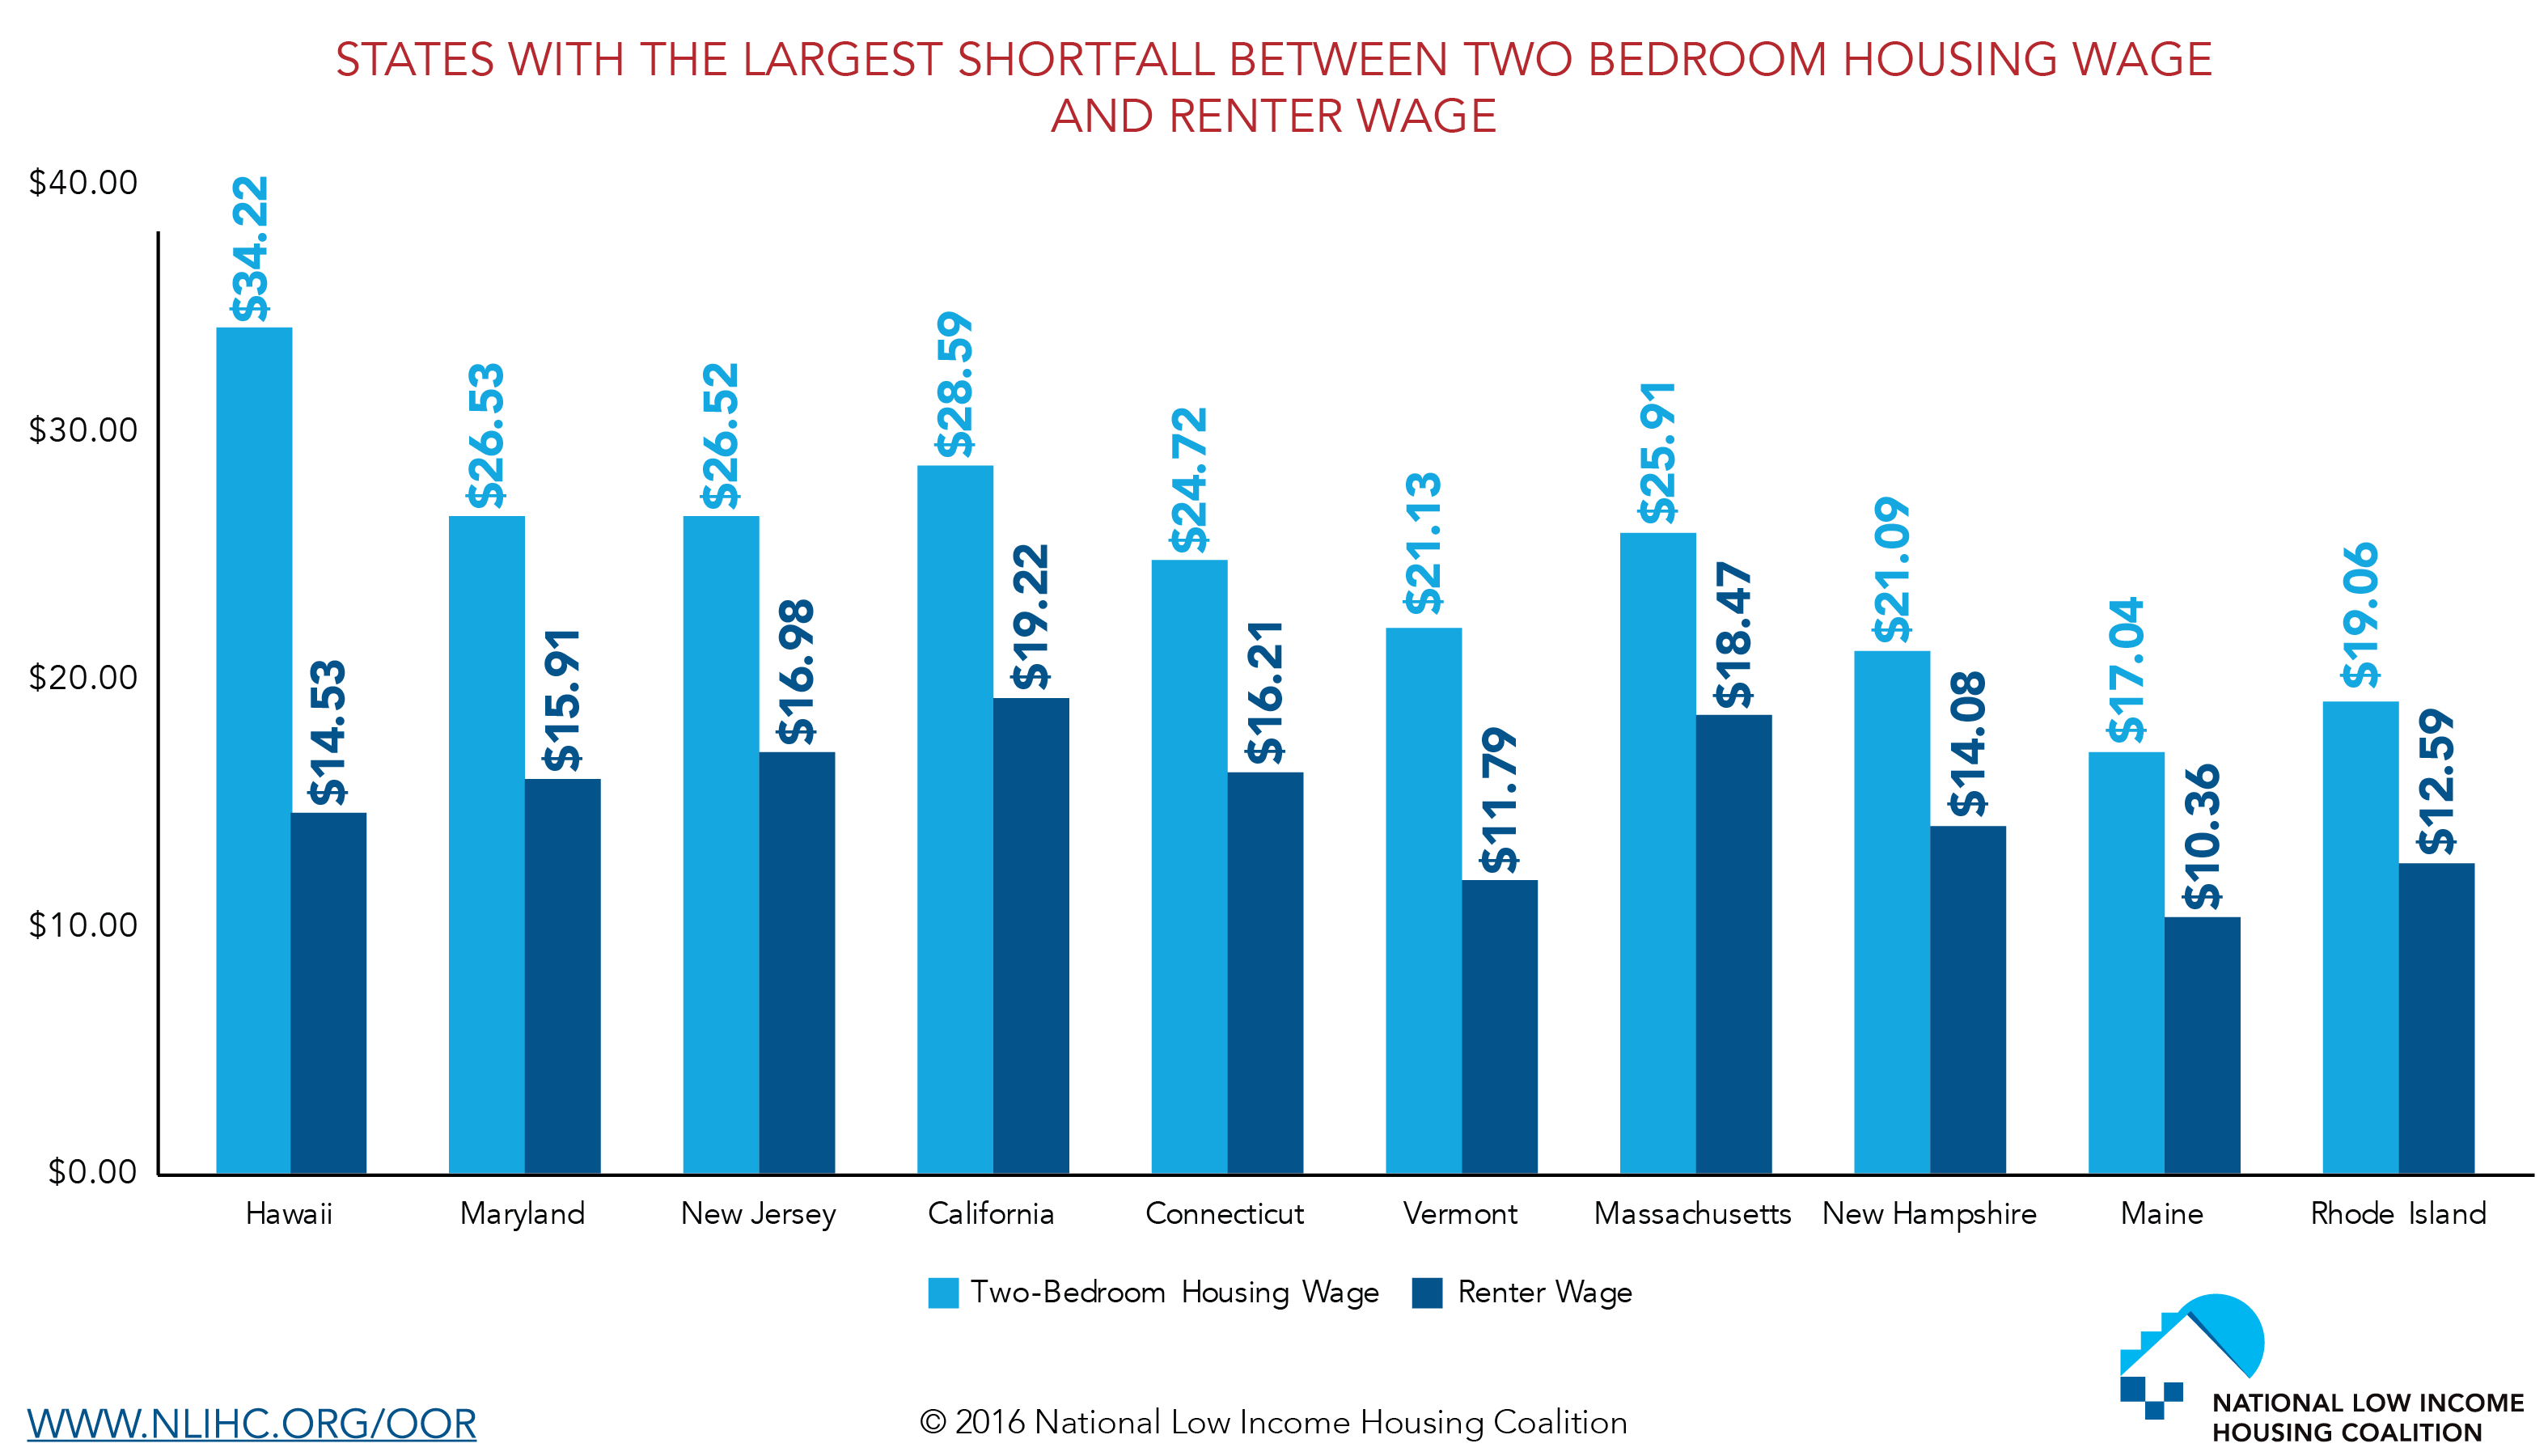 States with the Largest Shortfall Between Two-Bedroom Housing Wage and Renter Wage